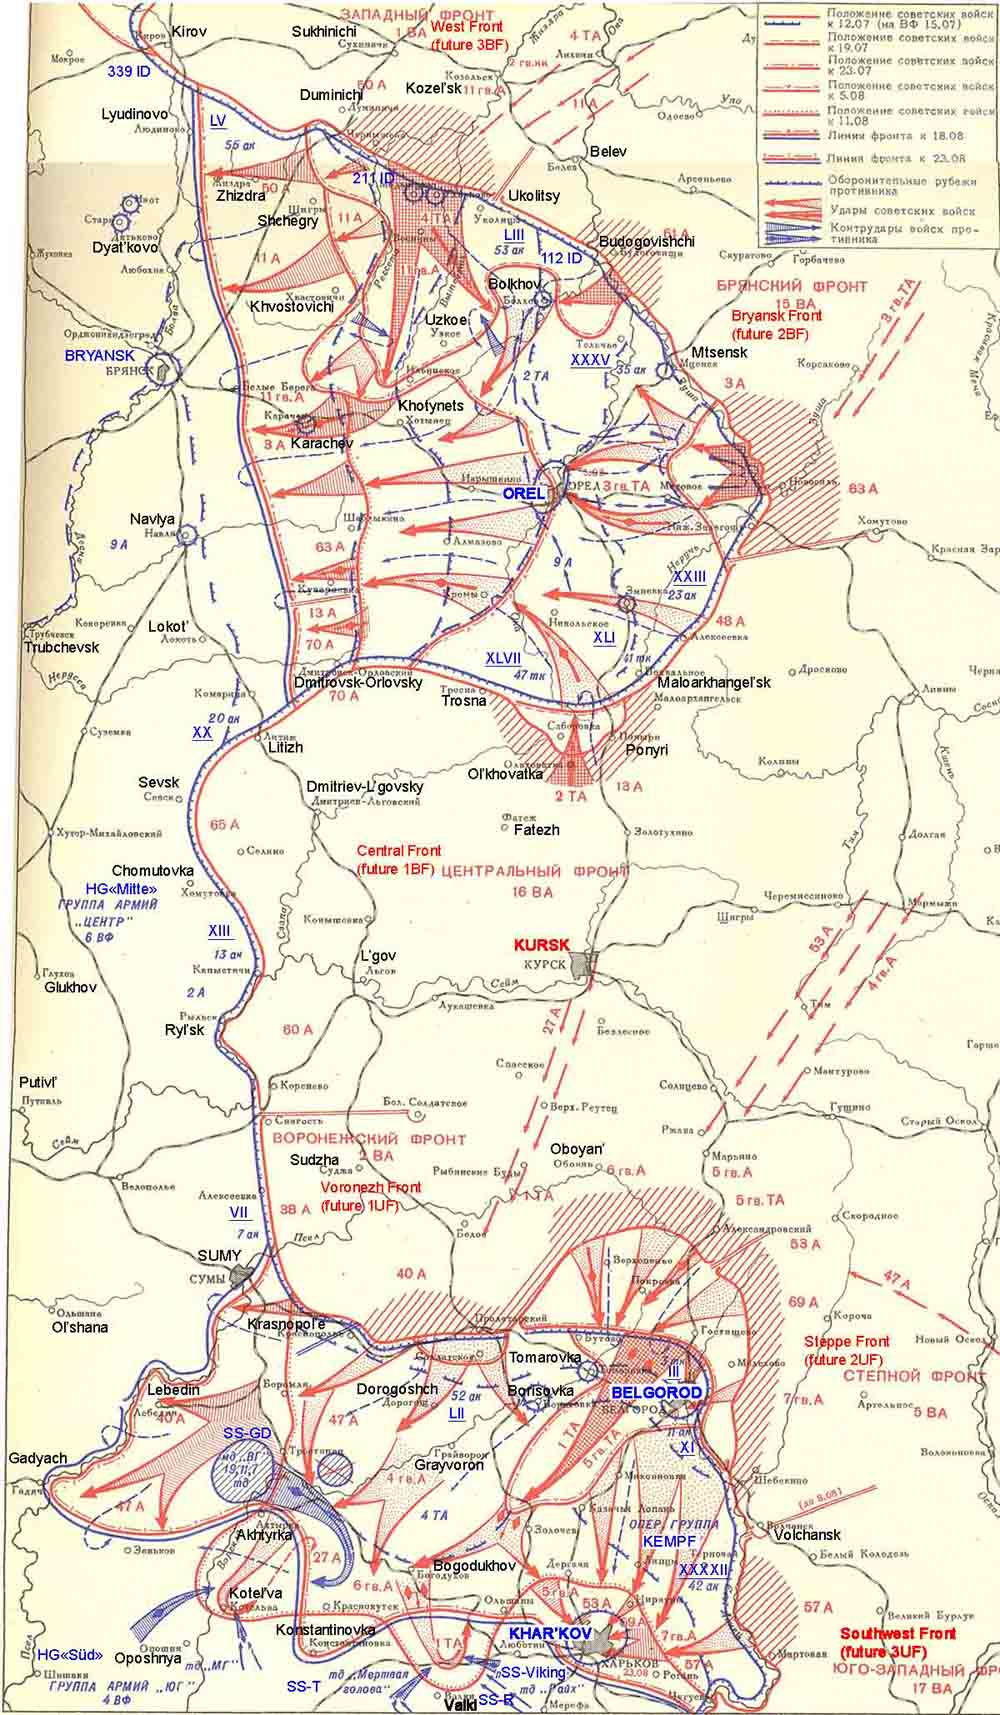 Actions of the contradictory parties in Orel-Kursk to battle from 05.07.1943 till 23.08.1943